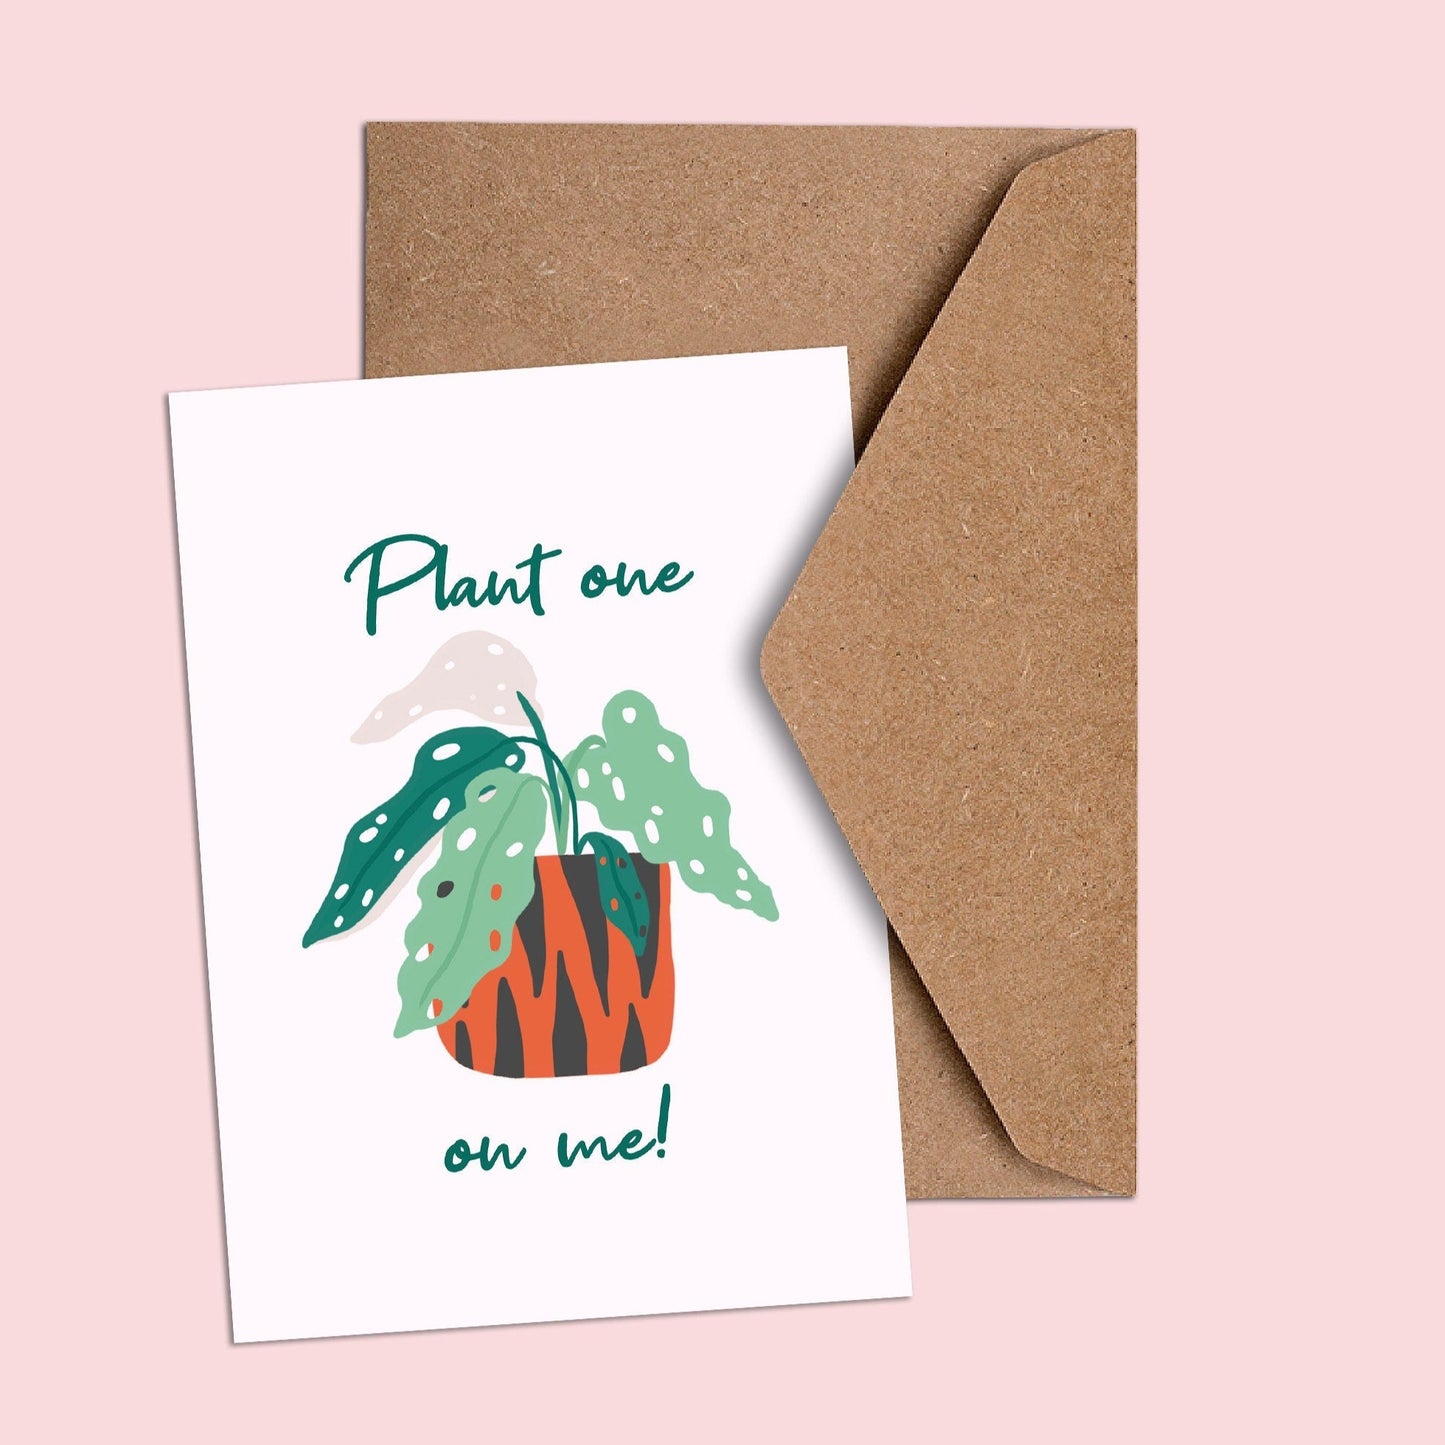 Plant one on me card